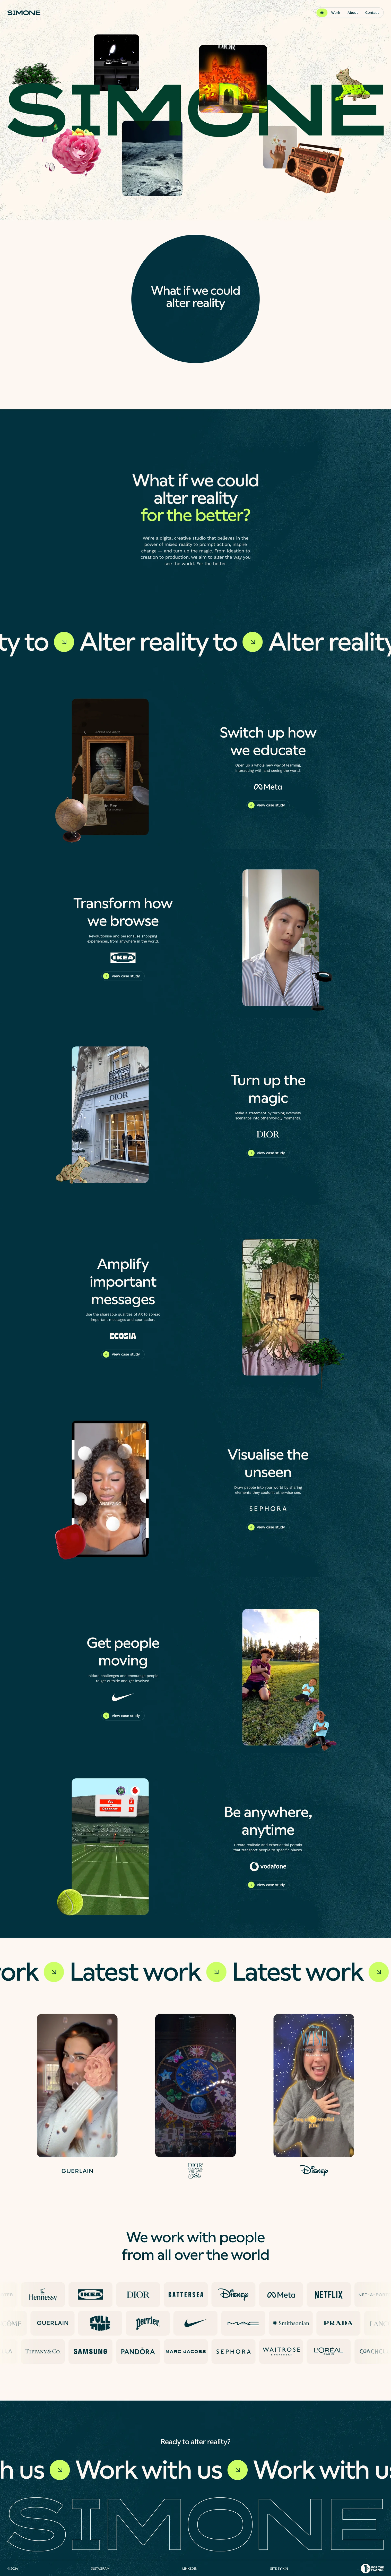 Simone Landing Page Example: Simone is a creative studio that believes in the power of AR to prompt action, inspire change and turn up the magic.